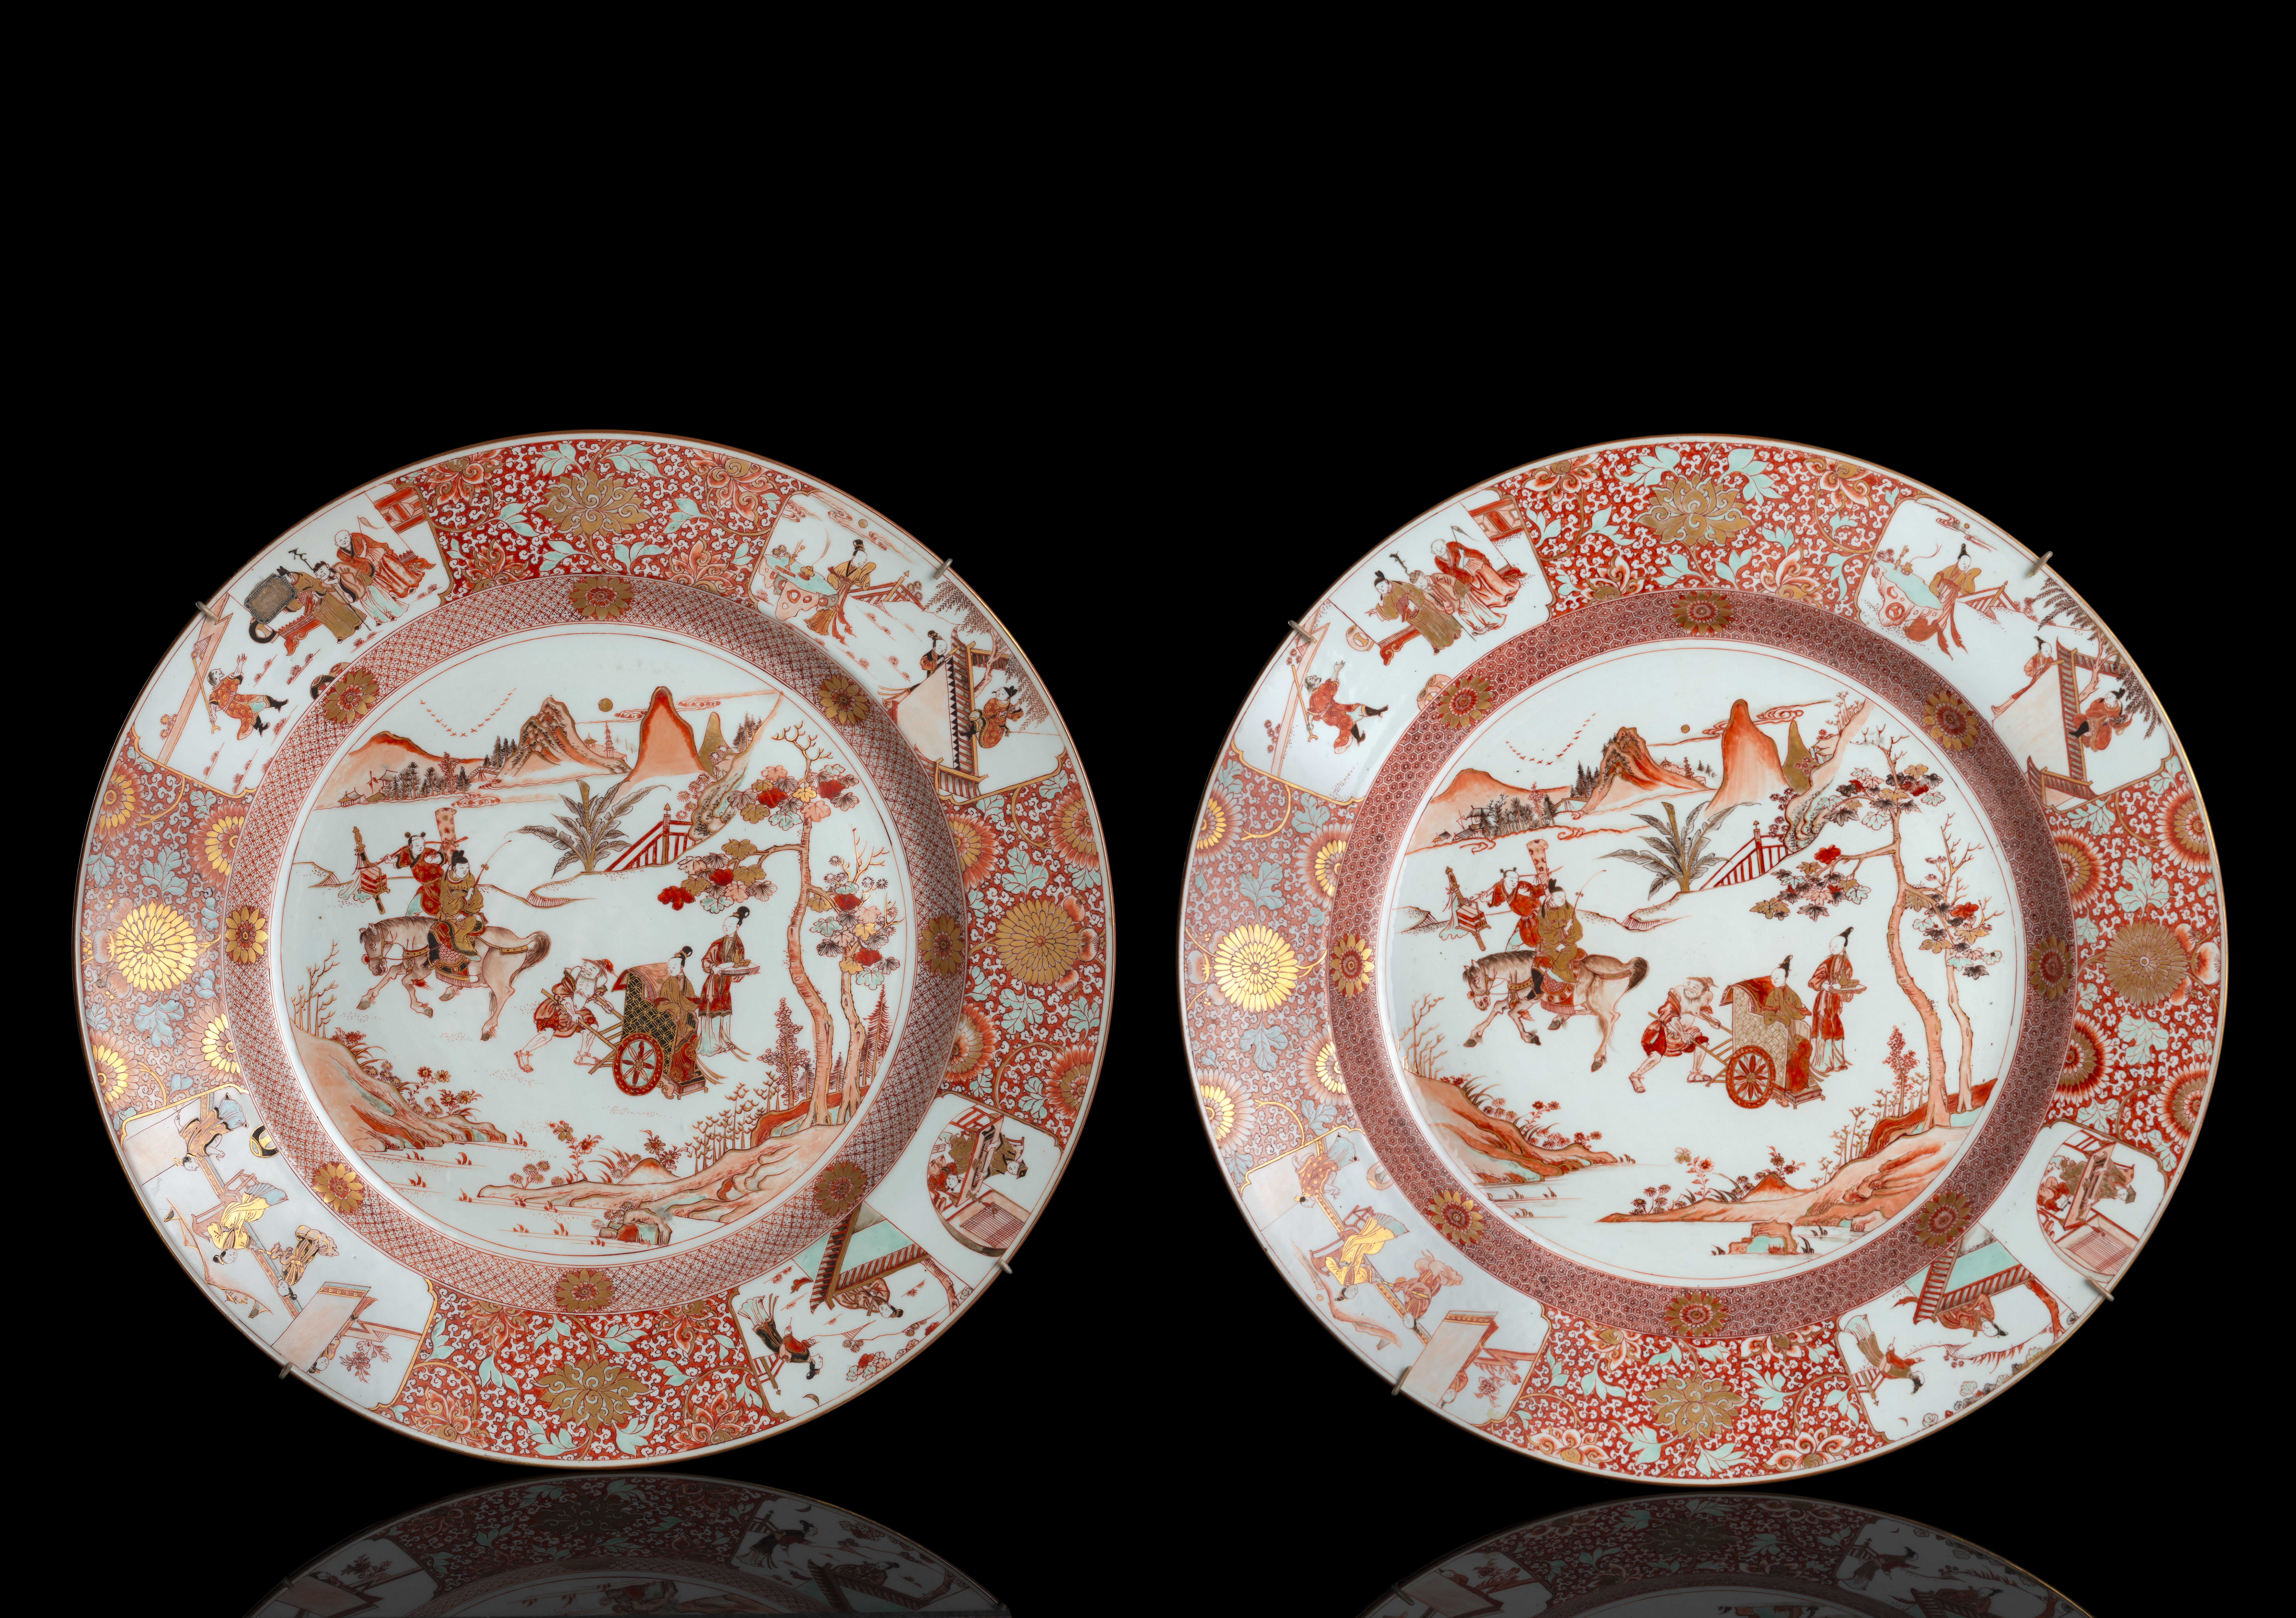 A PAIR OF VERY LARGE AND VERY RARE PORCELAIN CHARGER